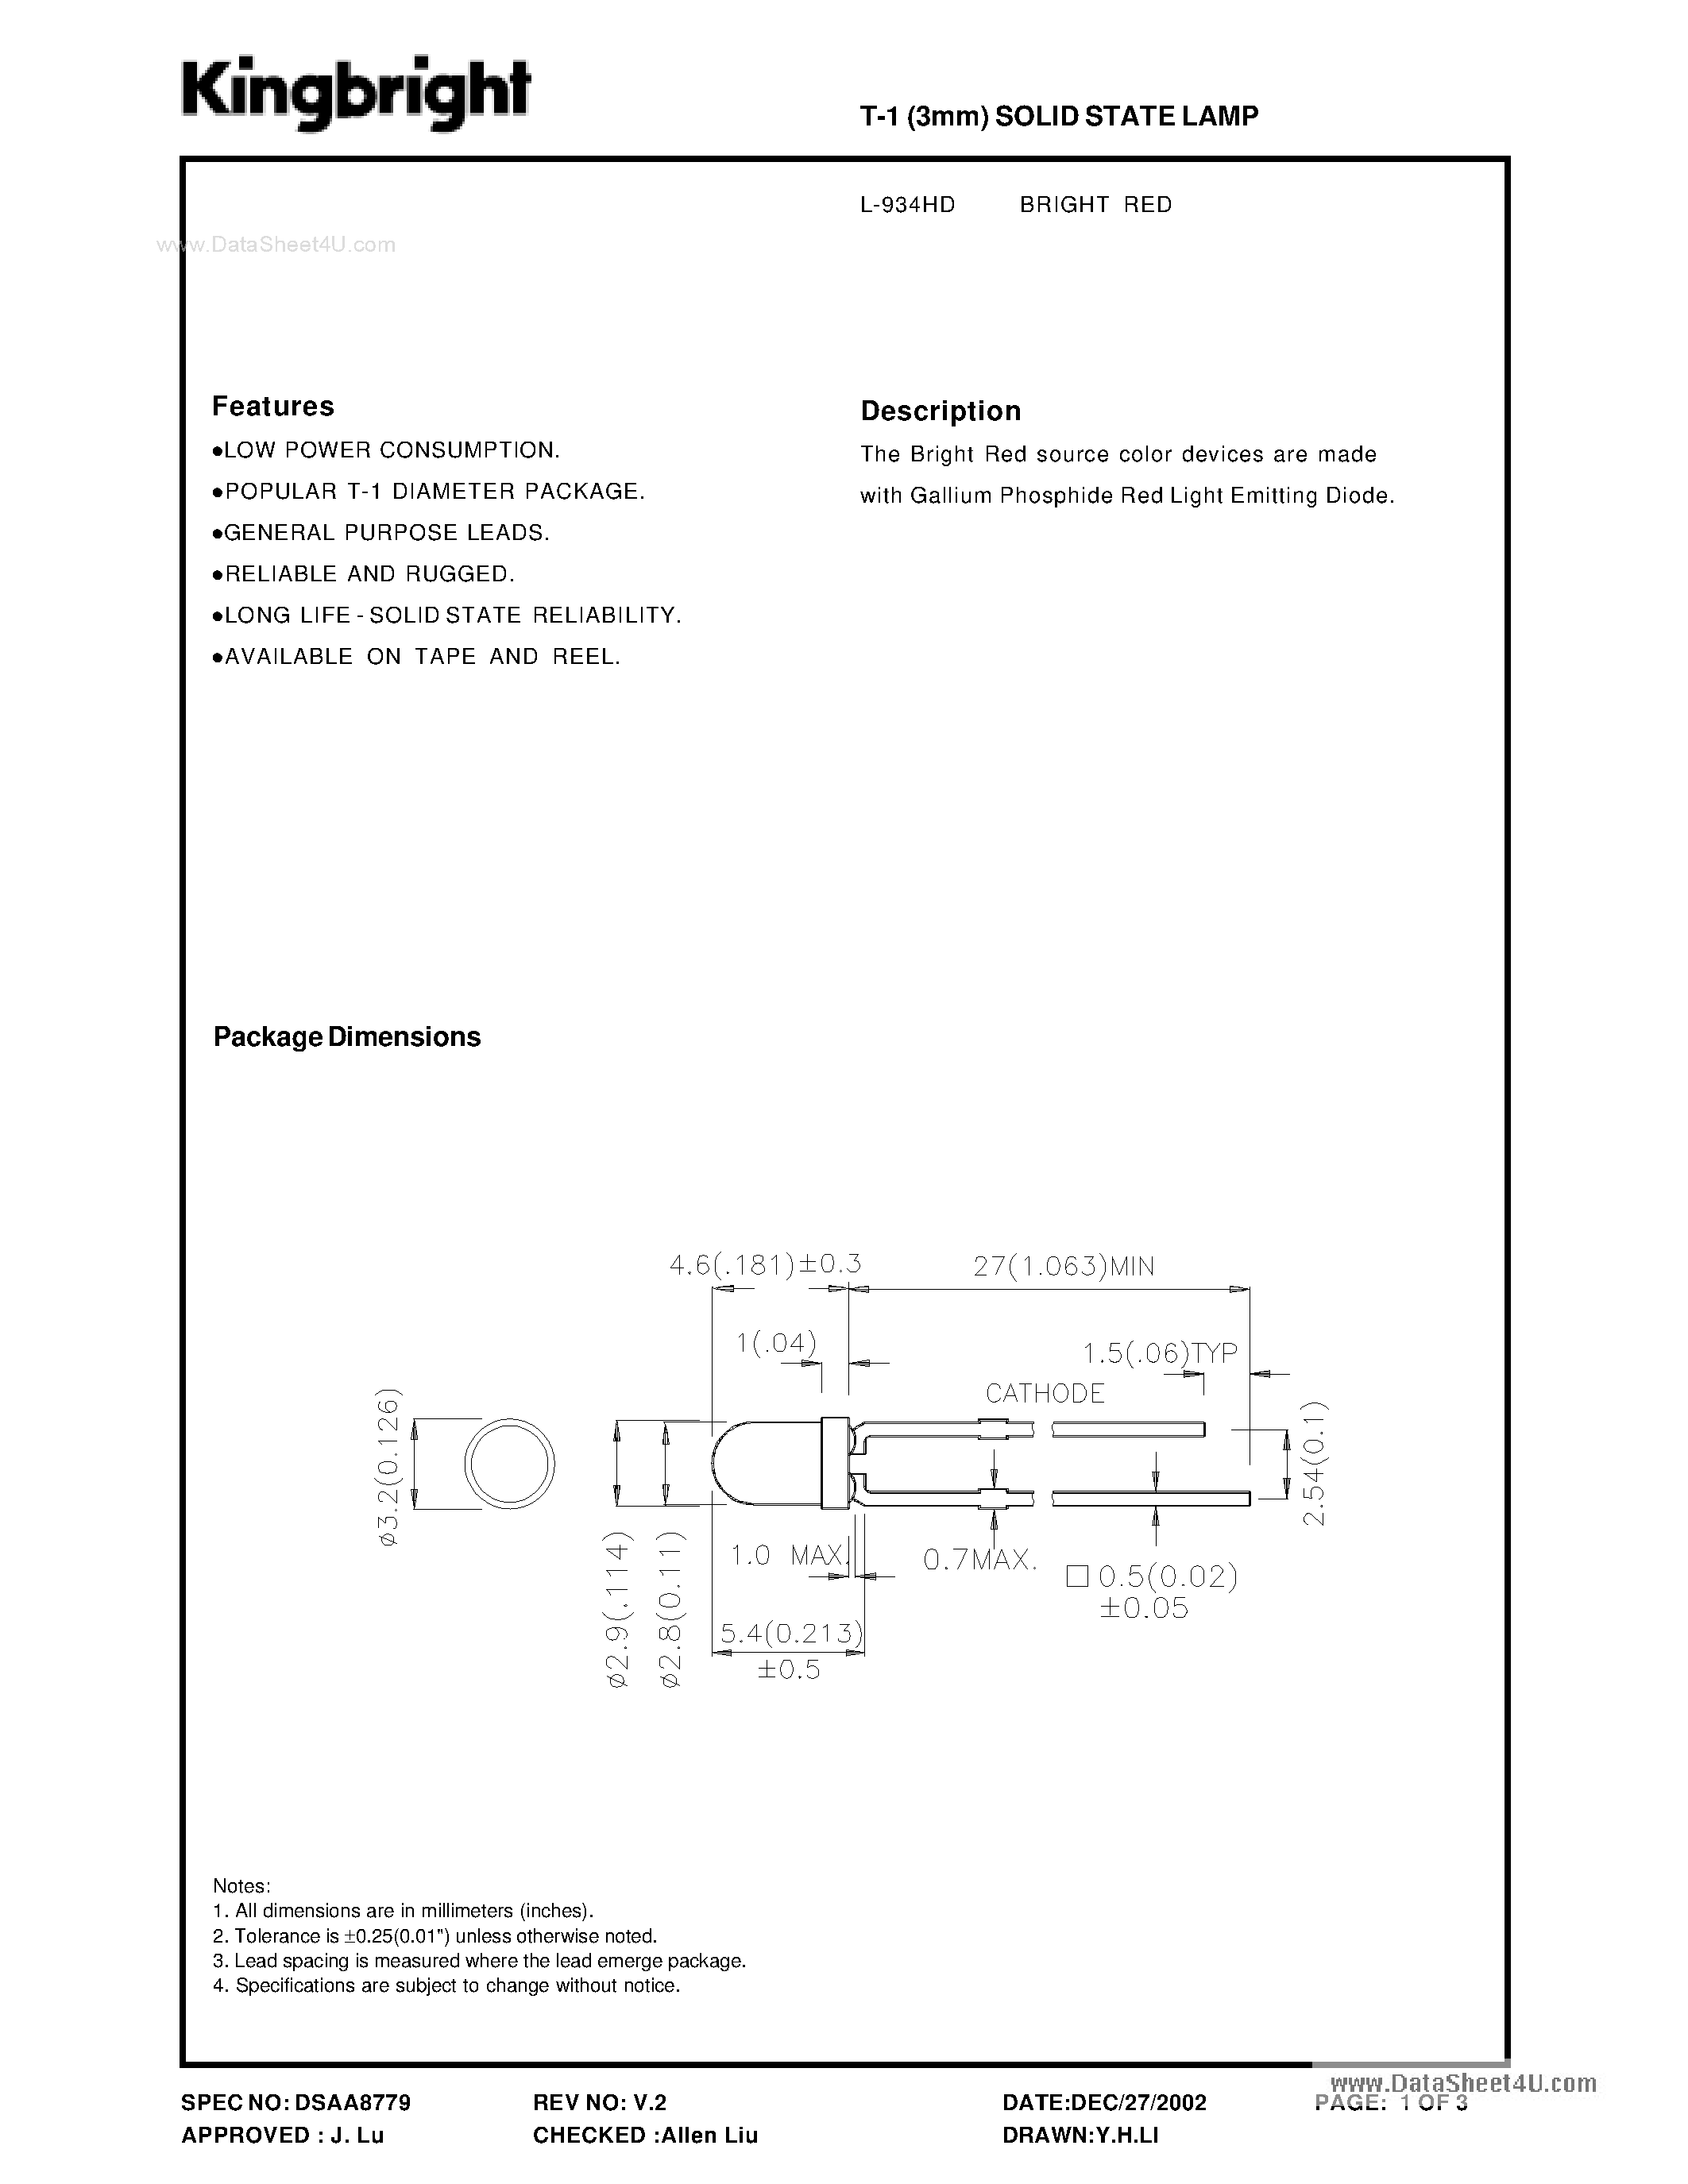 Datasheet L-934HD - Bright RED page 1